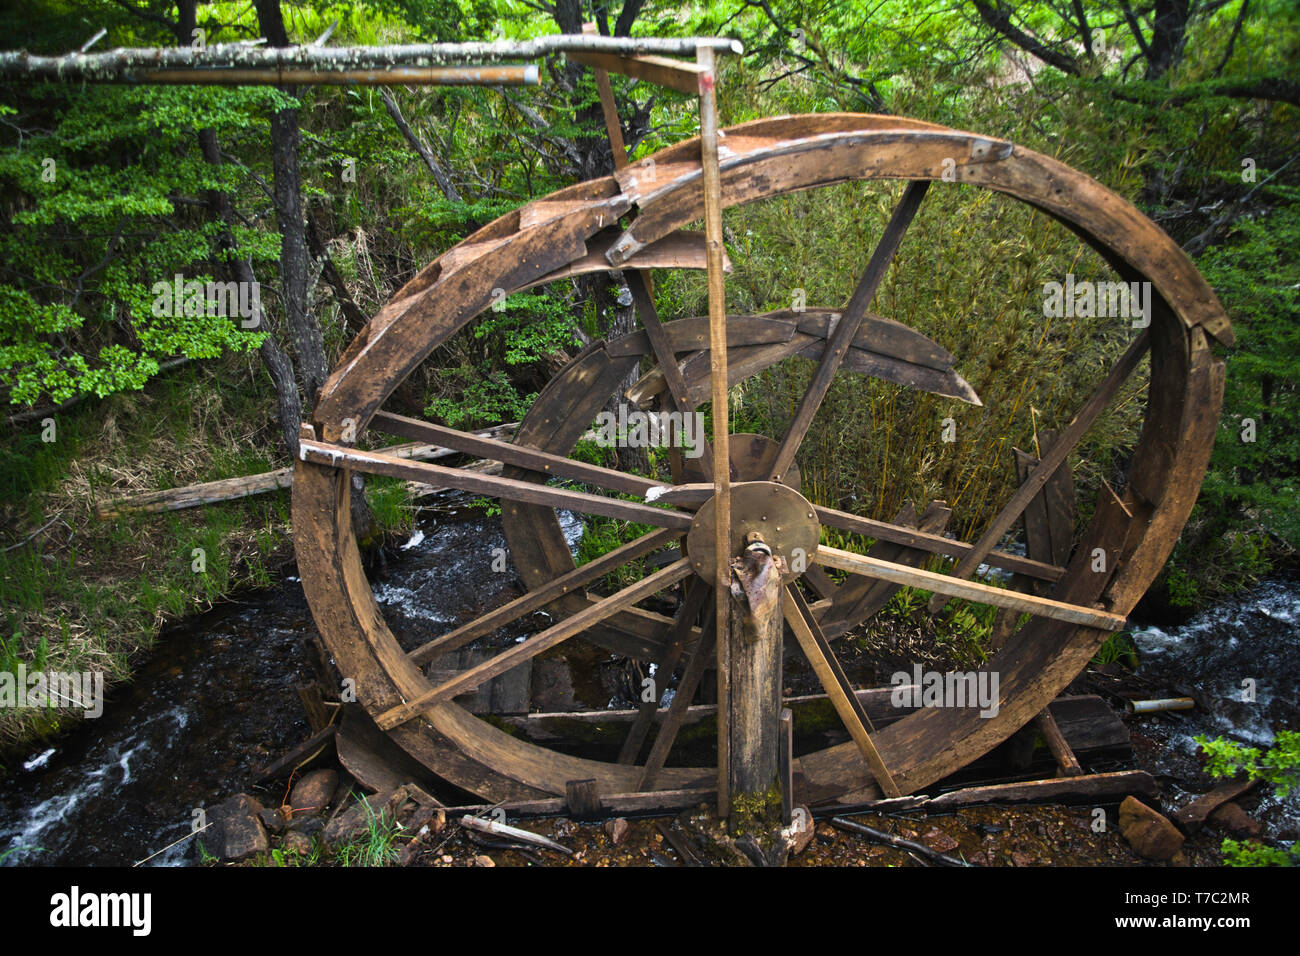 A disused broken traditional ,carved, wooden, overshot water wheel  used to generate power for forestry tools in Patagonia. Stock Photo